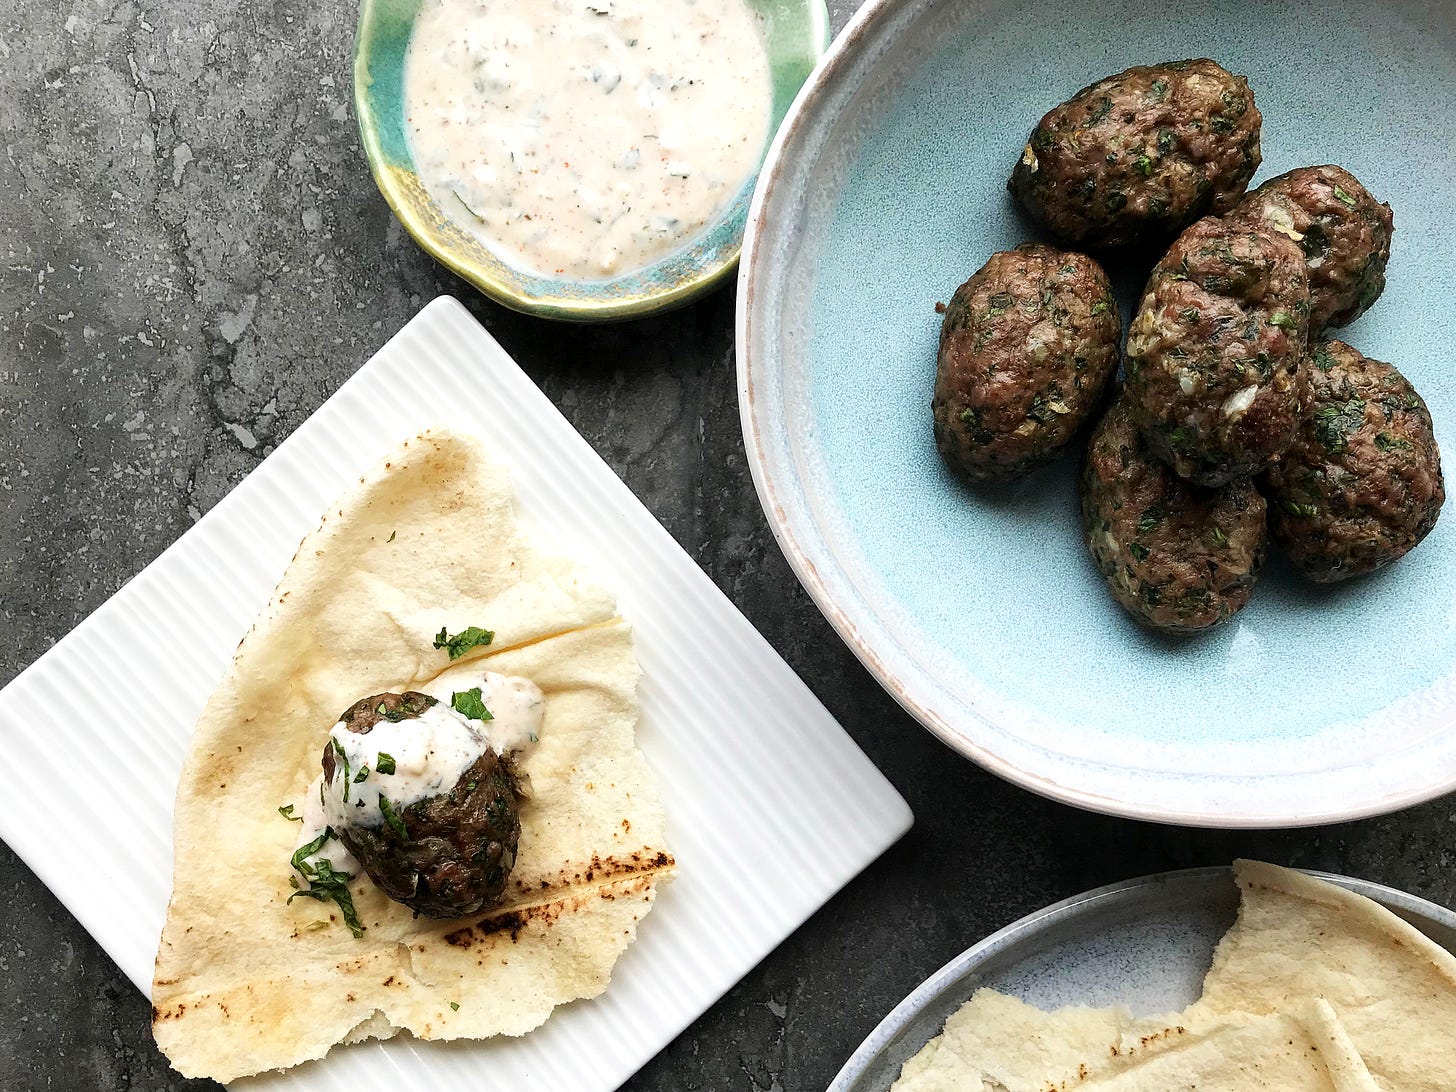 A bowl of kefta next to a small bowl of minted yoghurt sauce, a plate with a torn bit of pita on which sits a kefta, drizzled with the yoghurt sauce and sprinkled with chopped mint. Partially visible is a plate of torn pita.